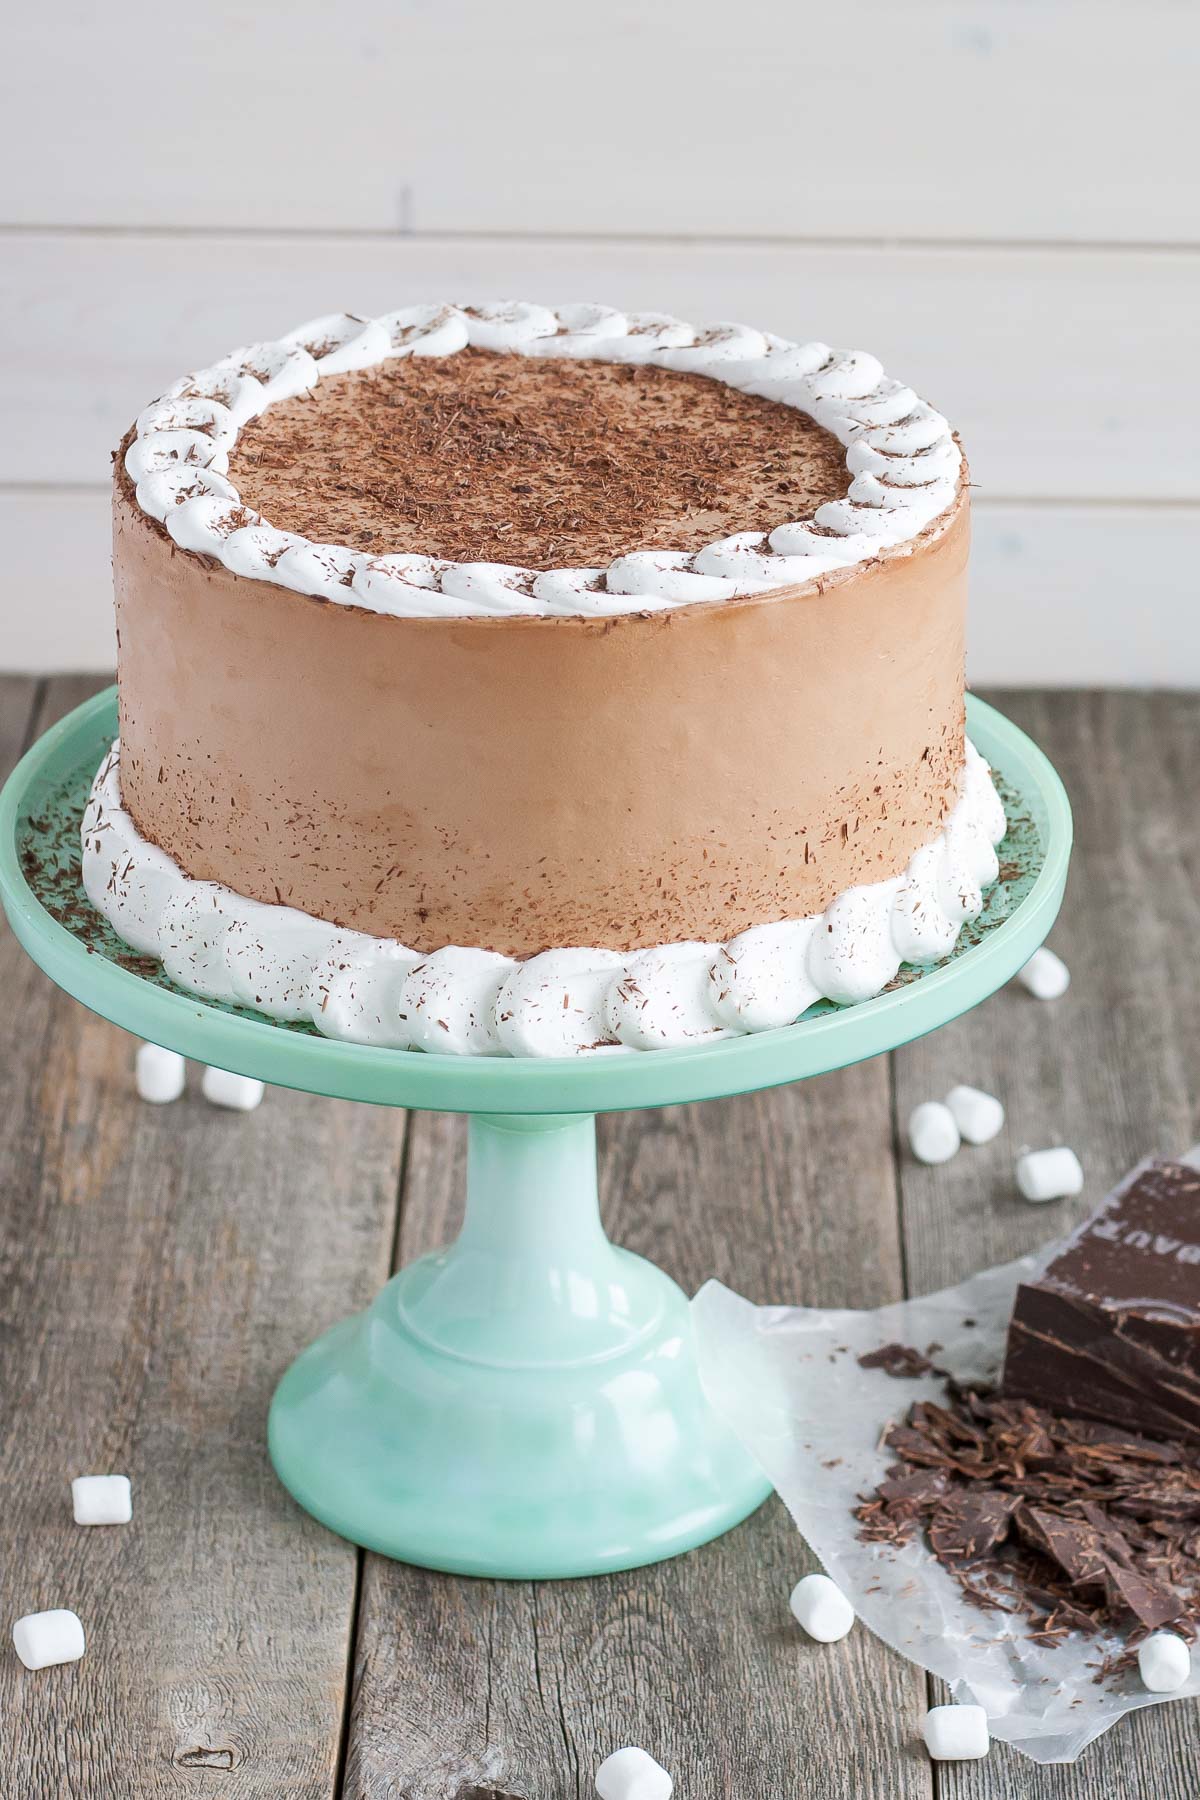 Hot Chocolate Cake With Marshmallow Filling